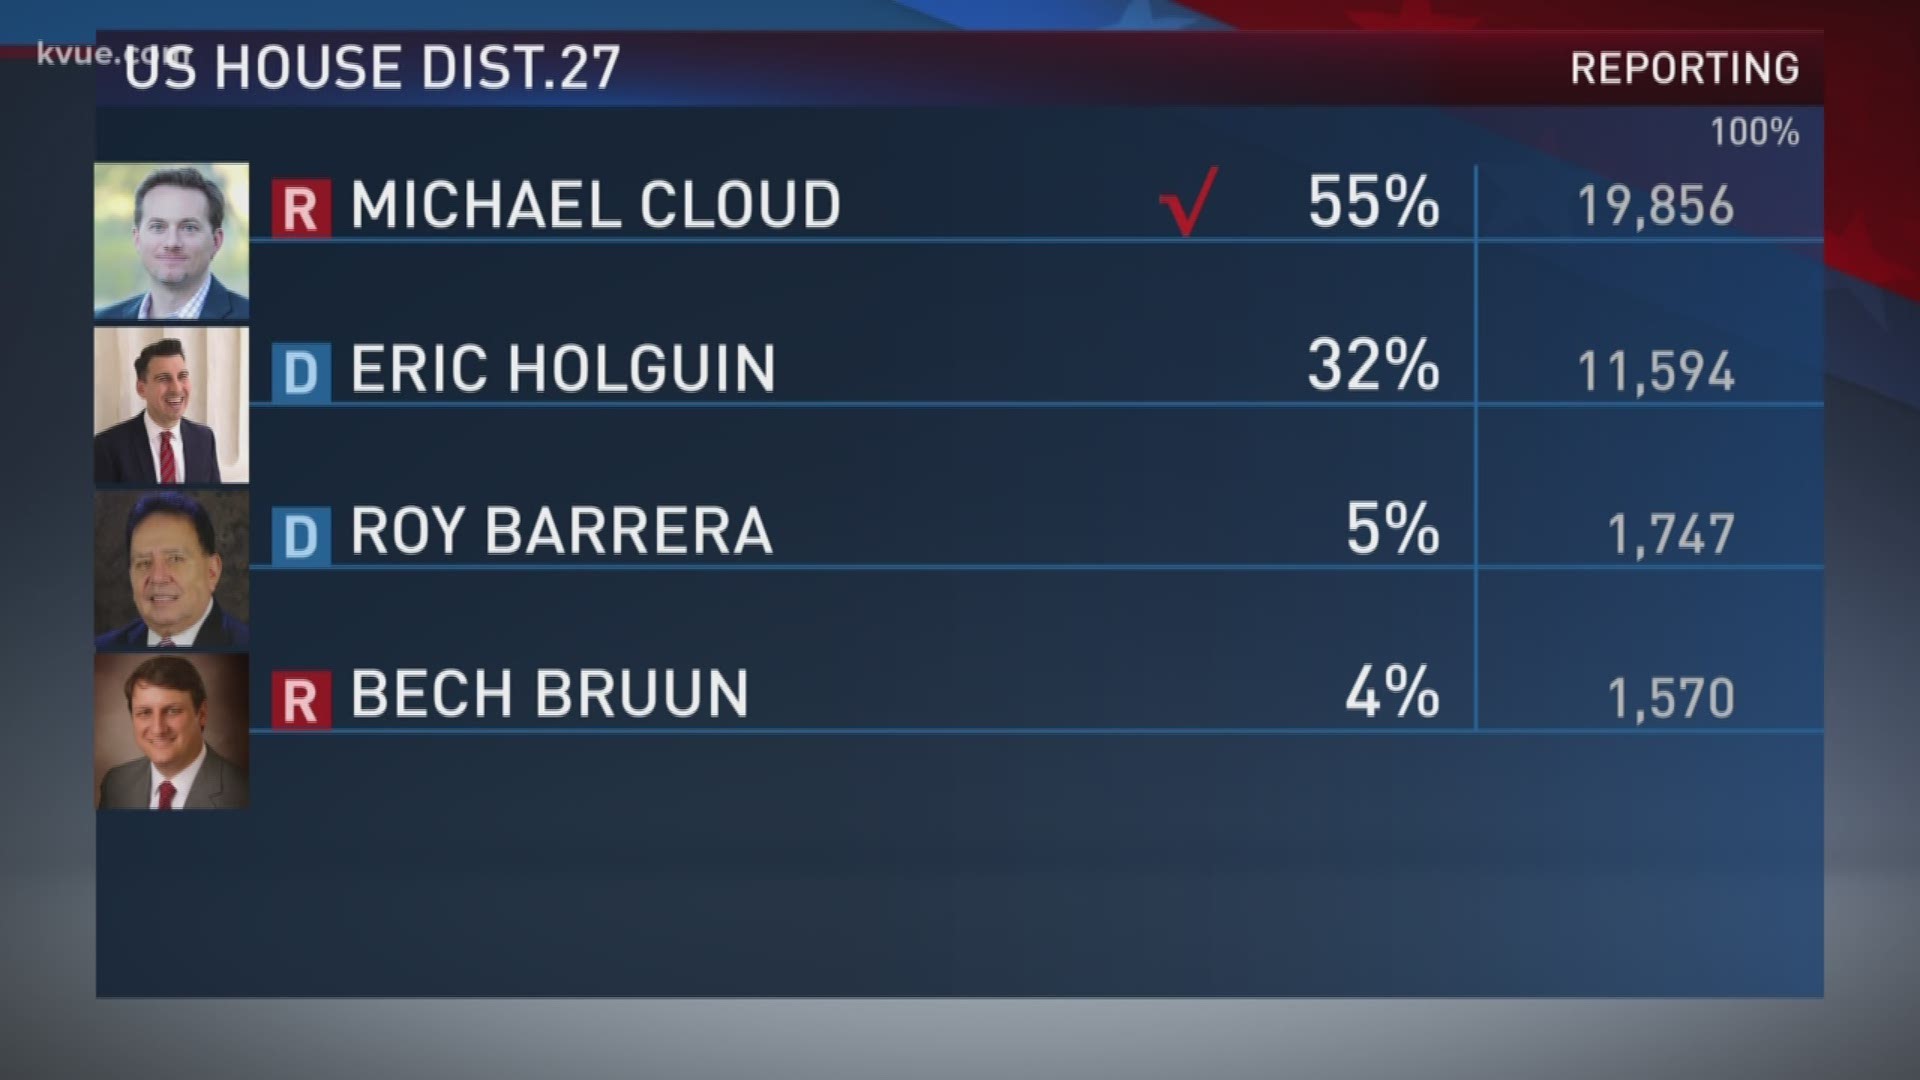 After disgraced ex-congressman Blake Farenthold resigned his seat in the House amid a sexual harassment scandal, Michael Cloud has temporarily replaced the representative in a special election.